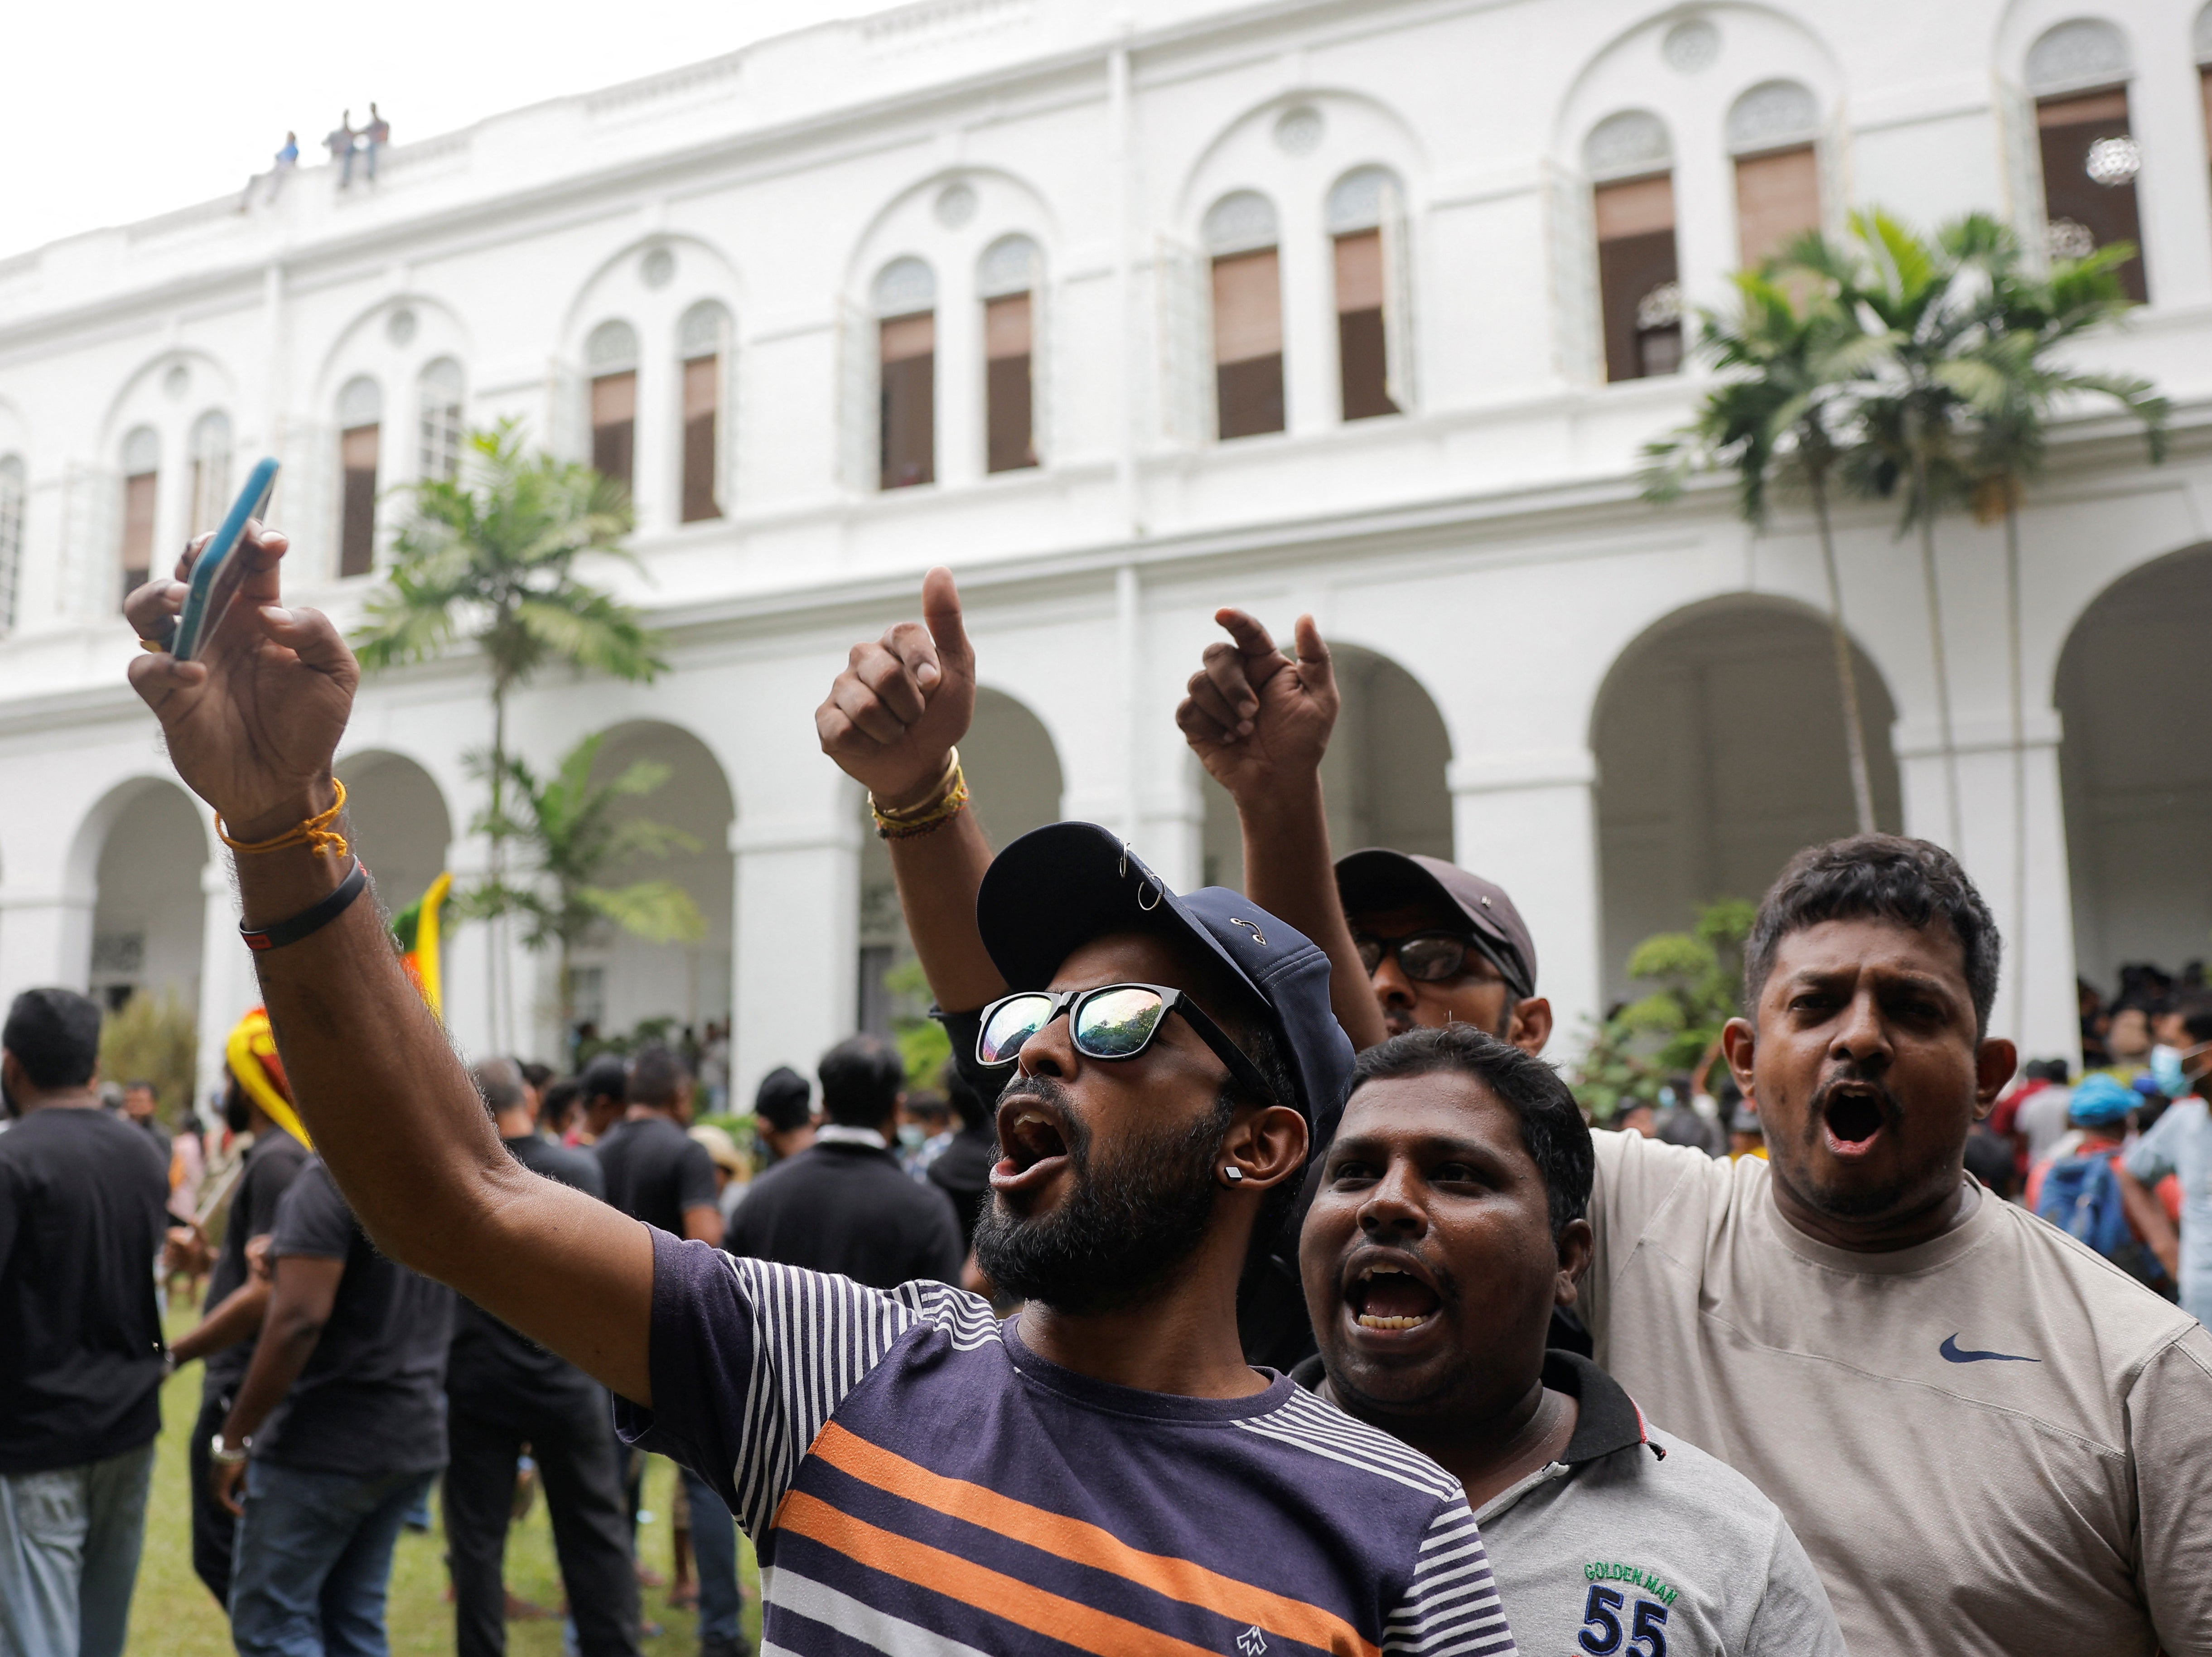 Sri Lankans are angry over the handling of the country’s econimic crisis